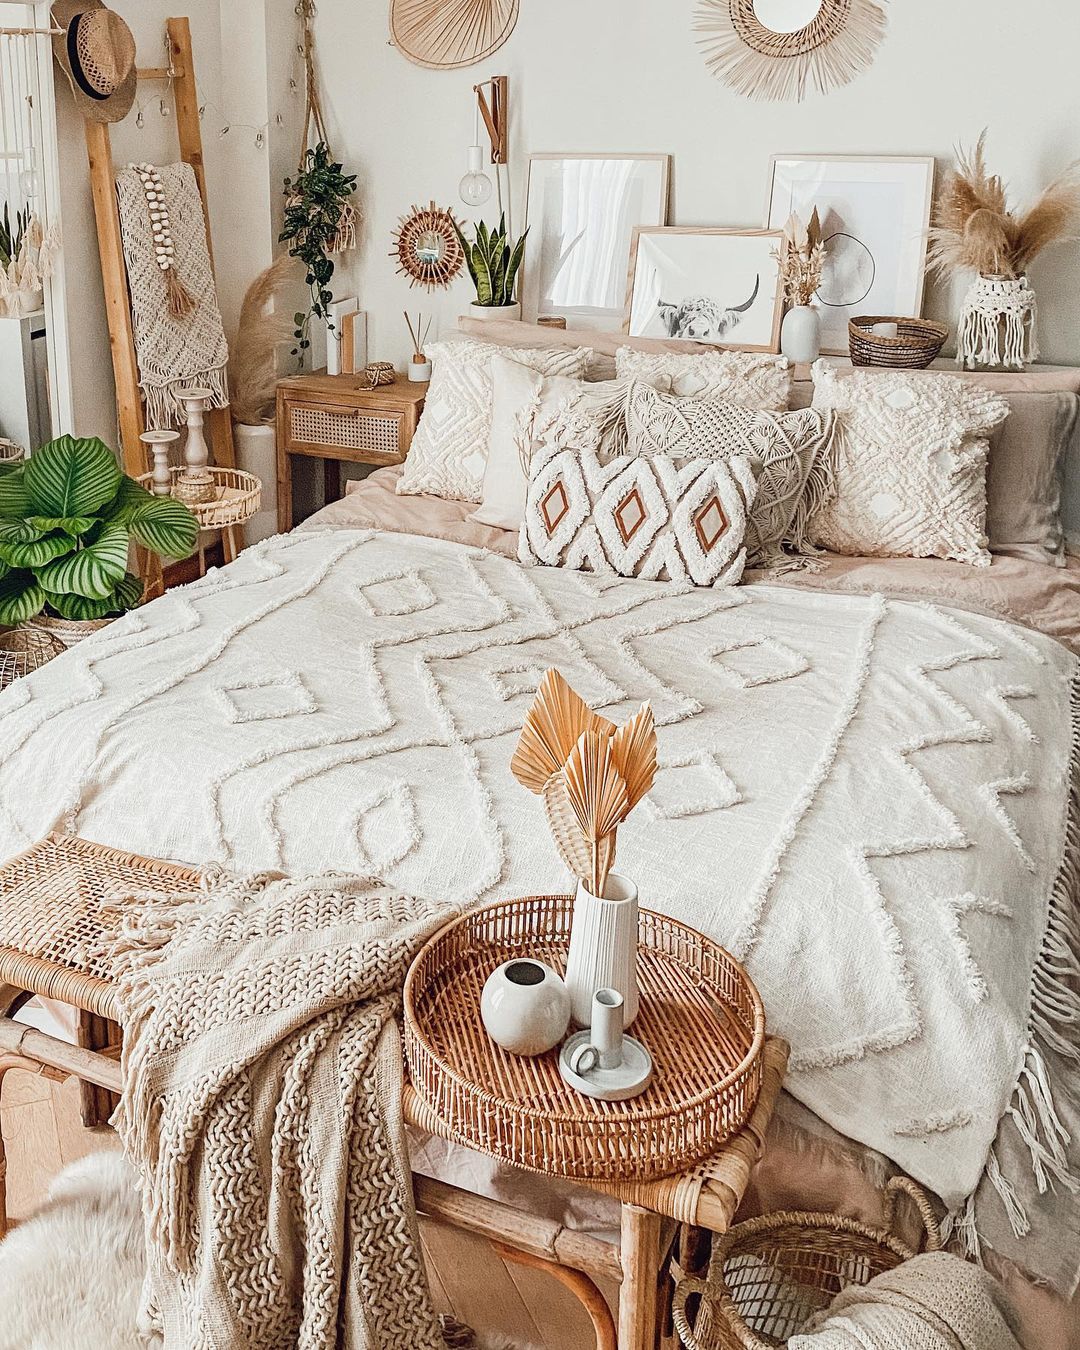 35 Examples of Bohemian Home Décor - Upgrade Your Home